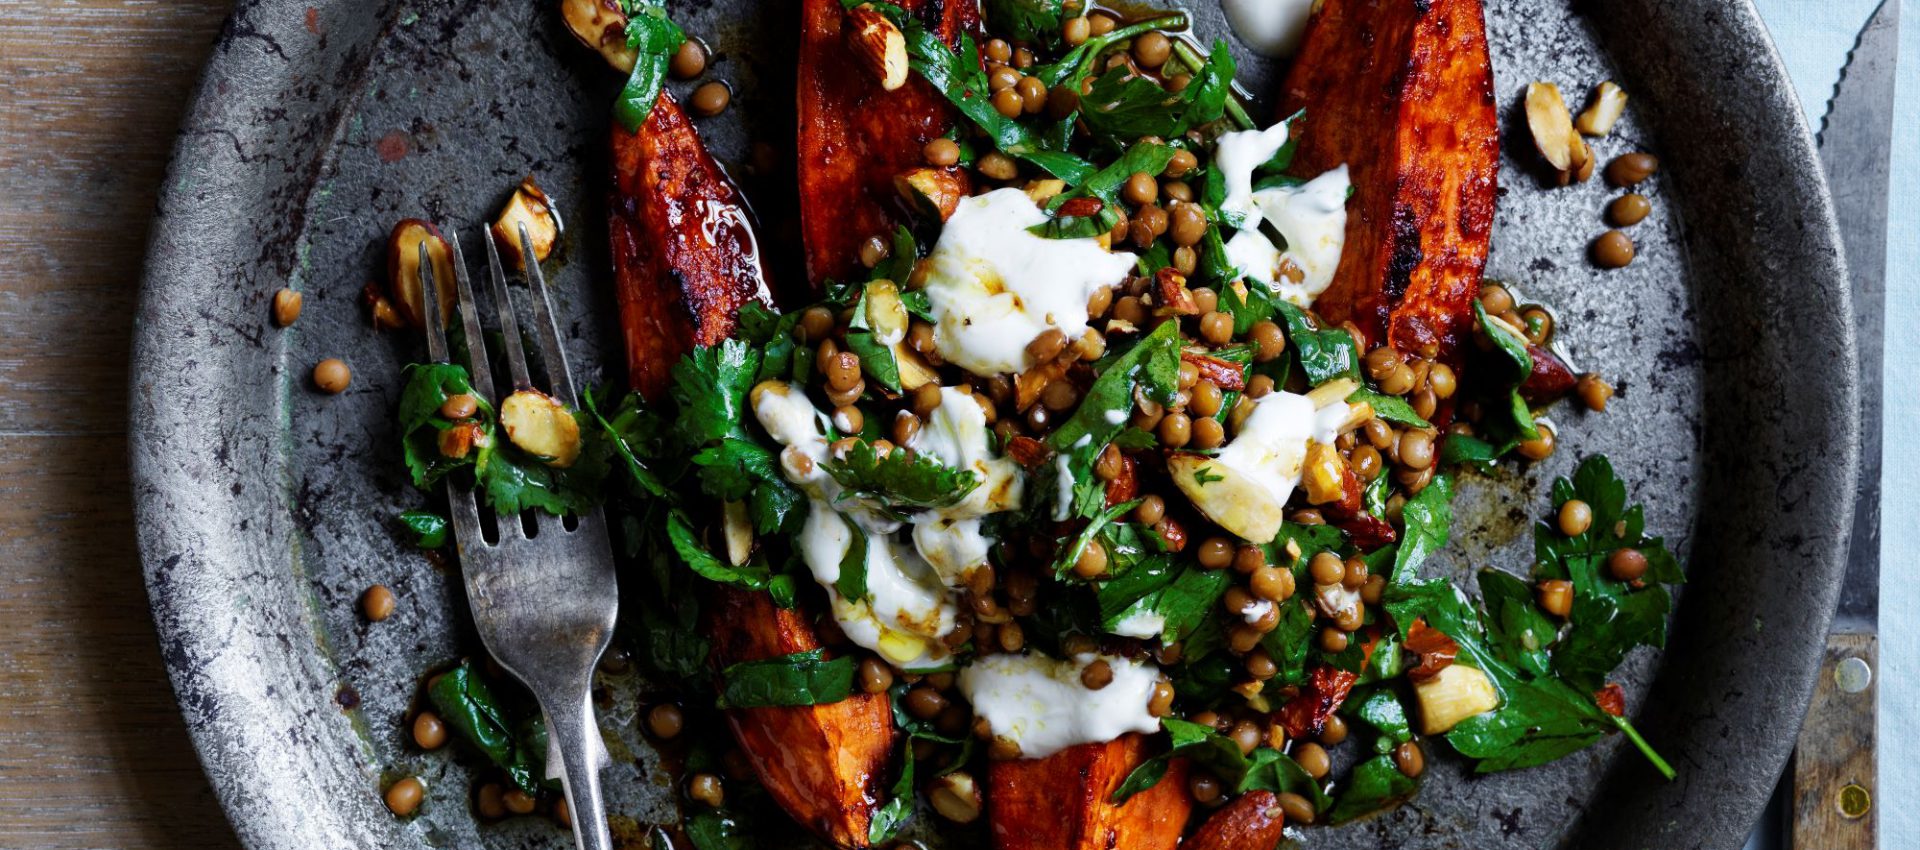 Sweet potato lentil and spinach salad